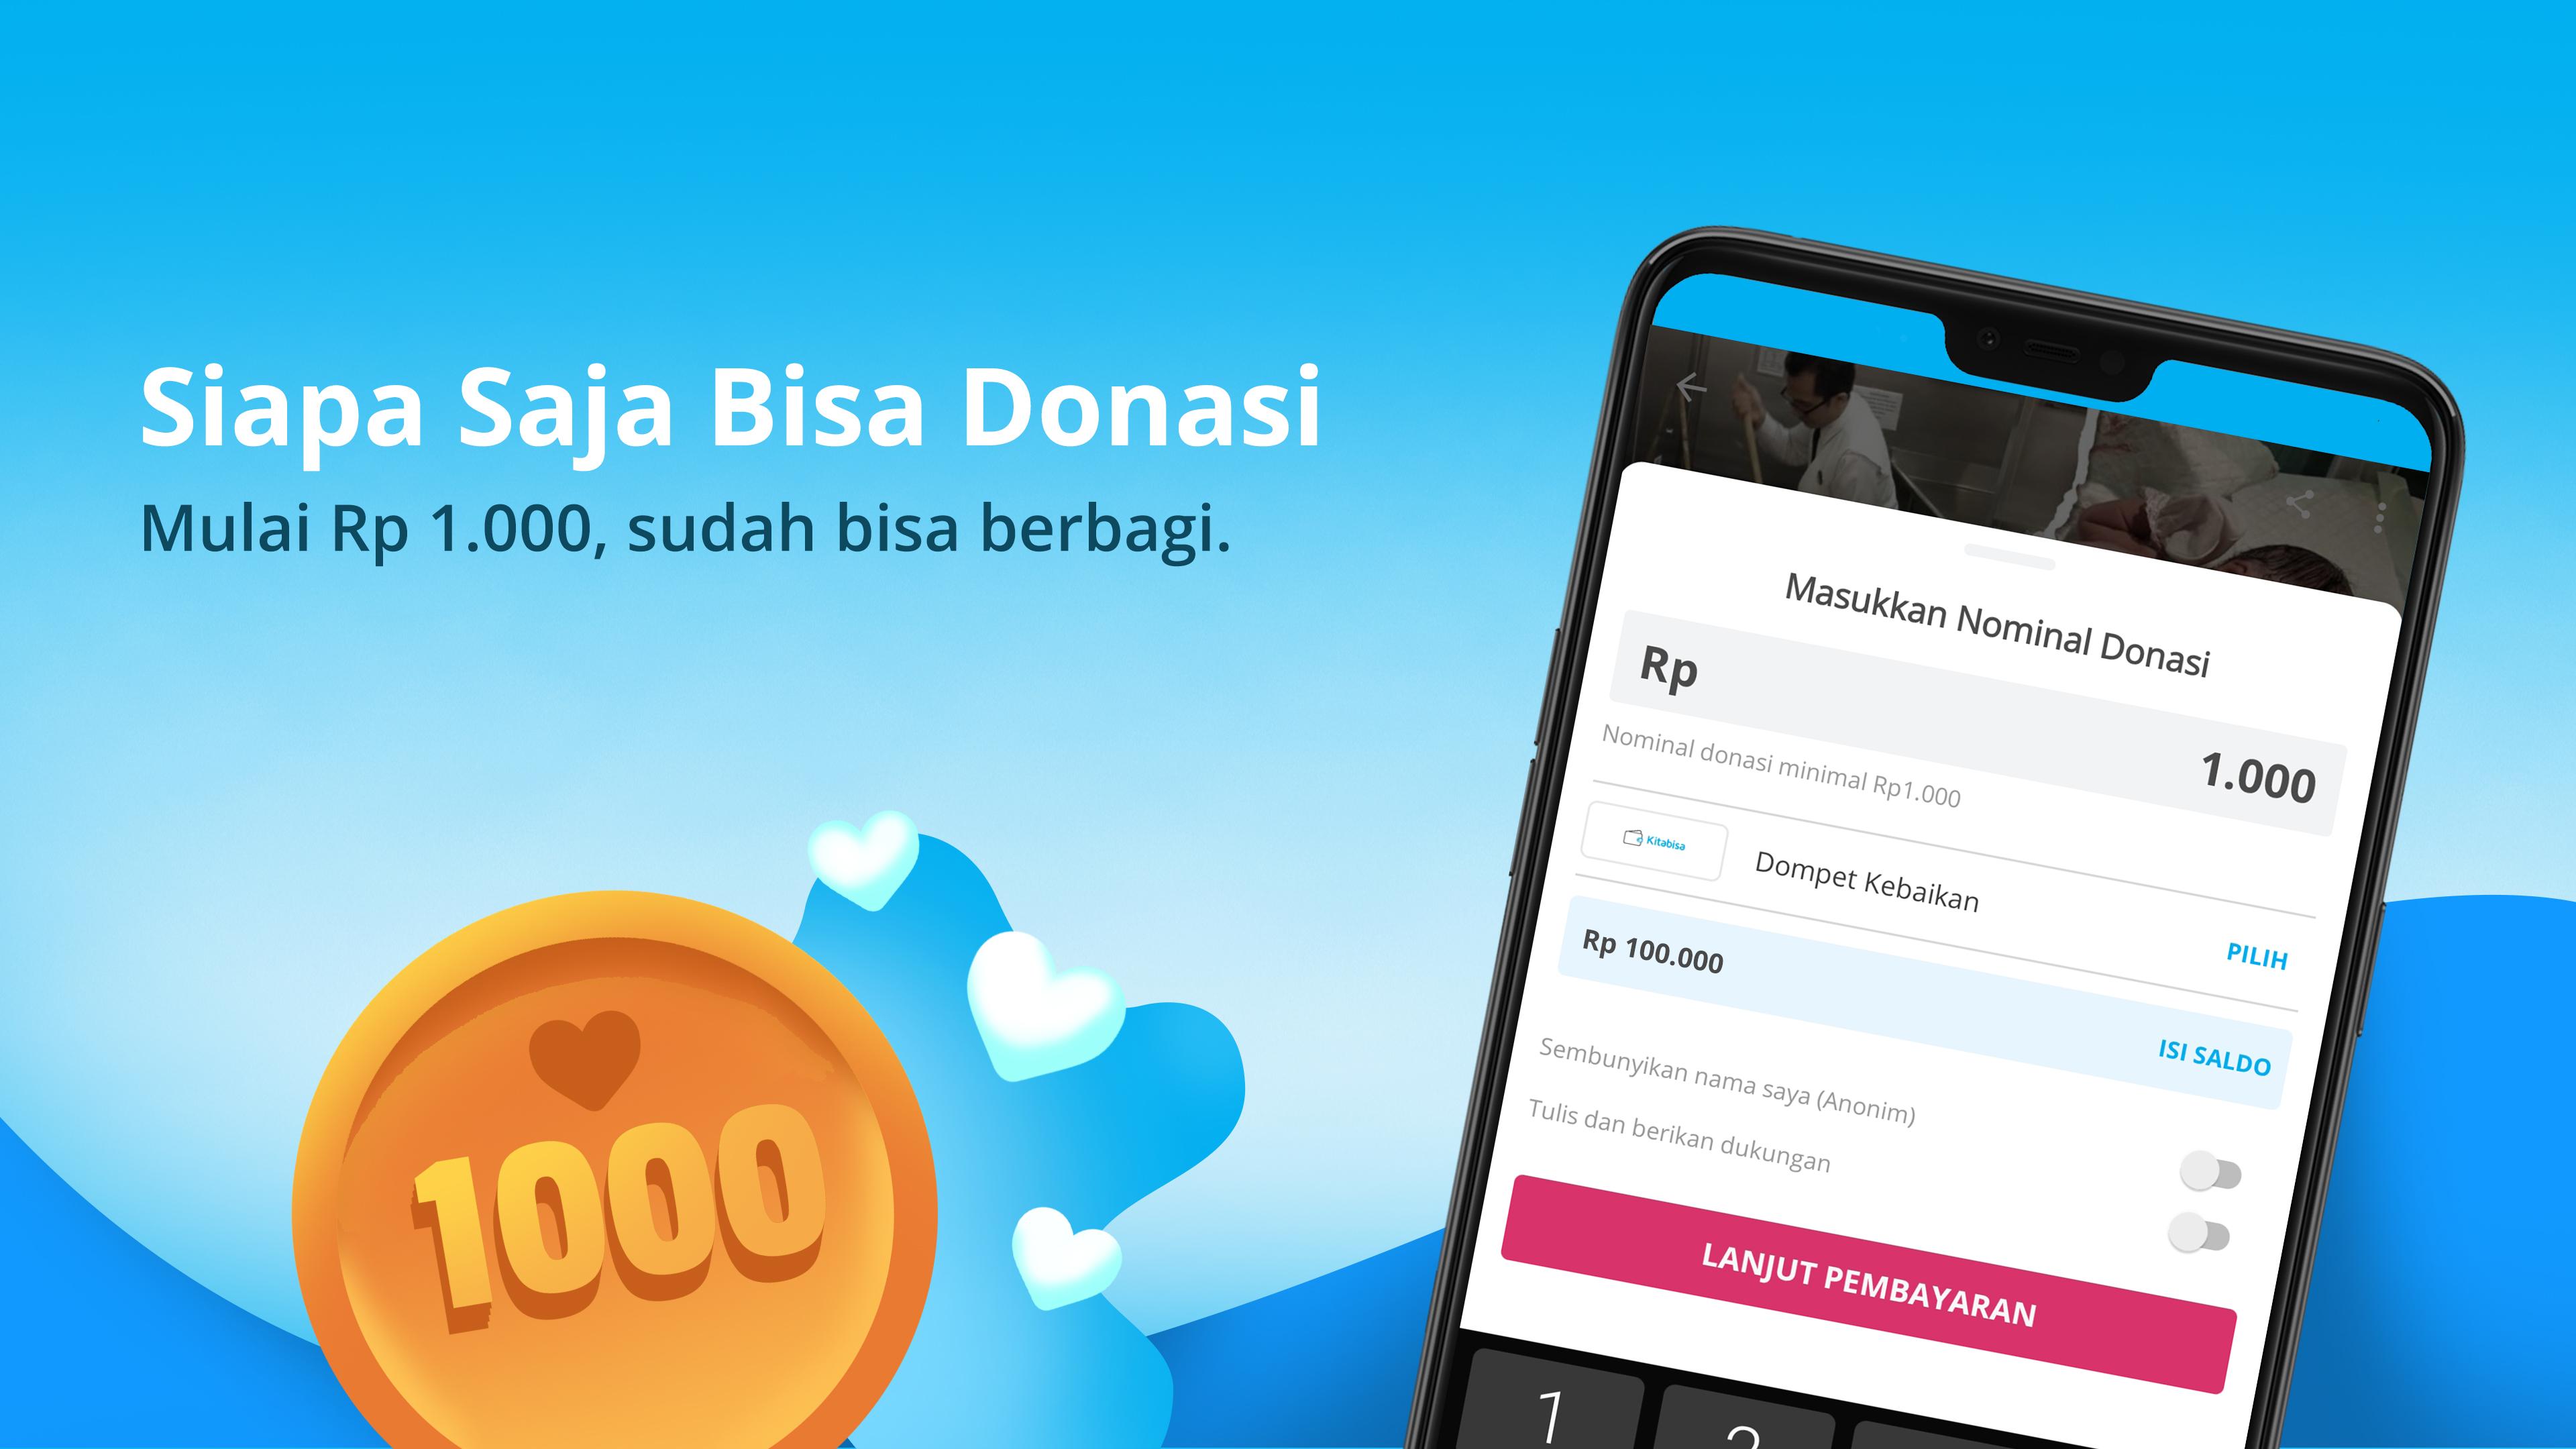 Kitabisa for Android APK Download